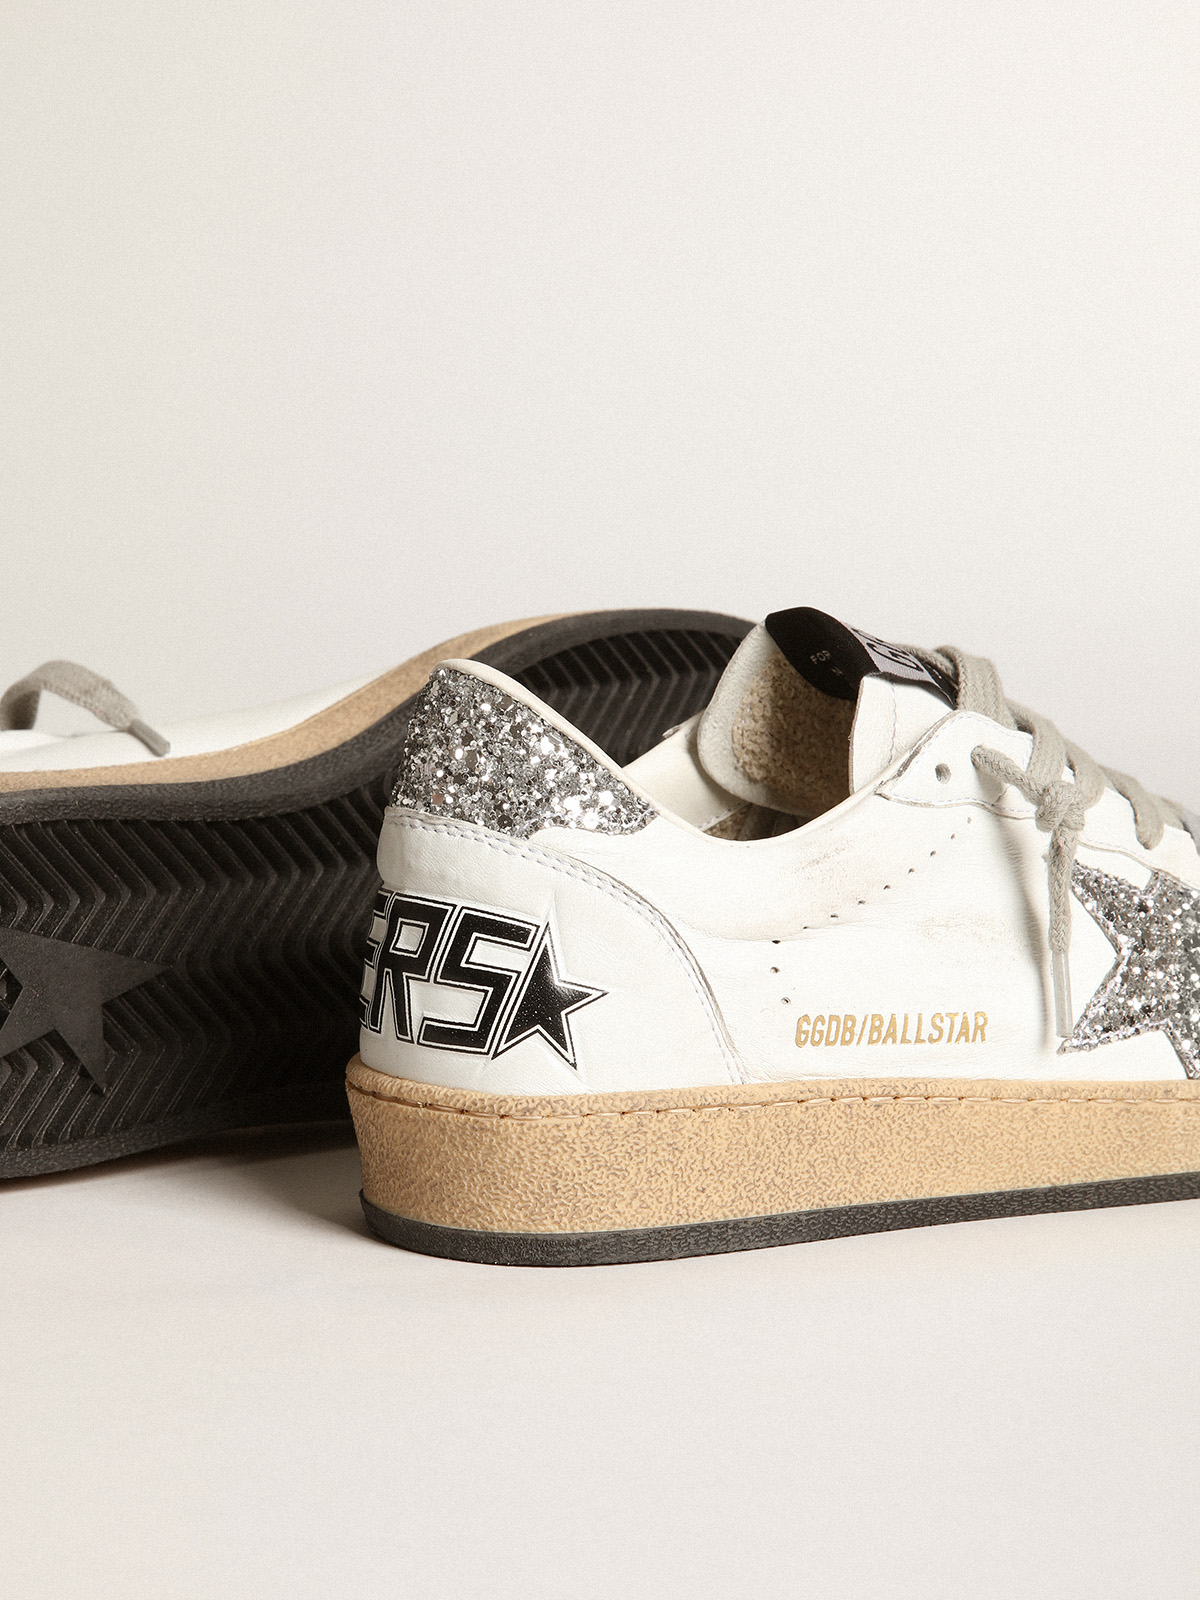 Women's Ball Star in nappa with white star and glitter heel tab